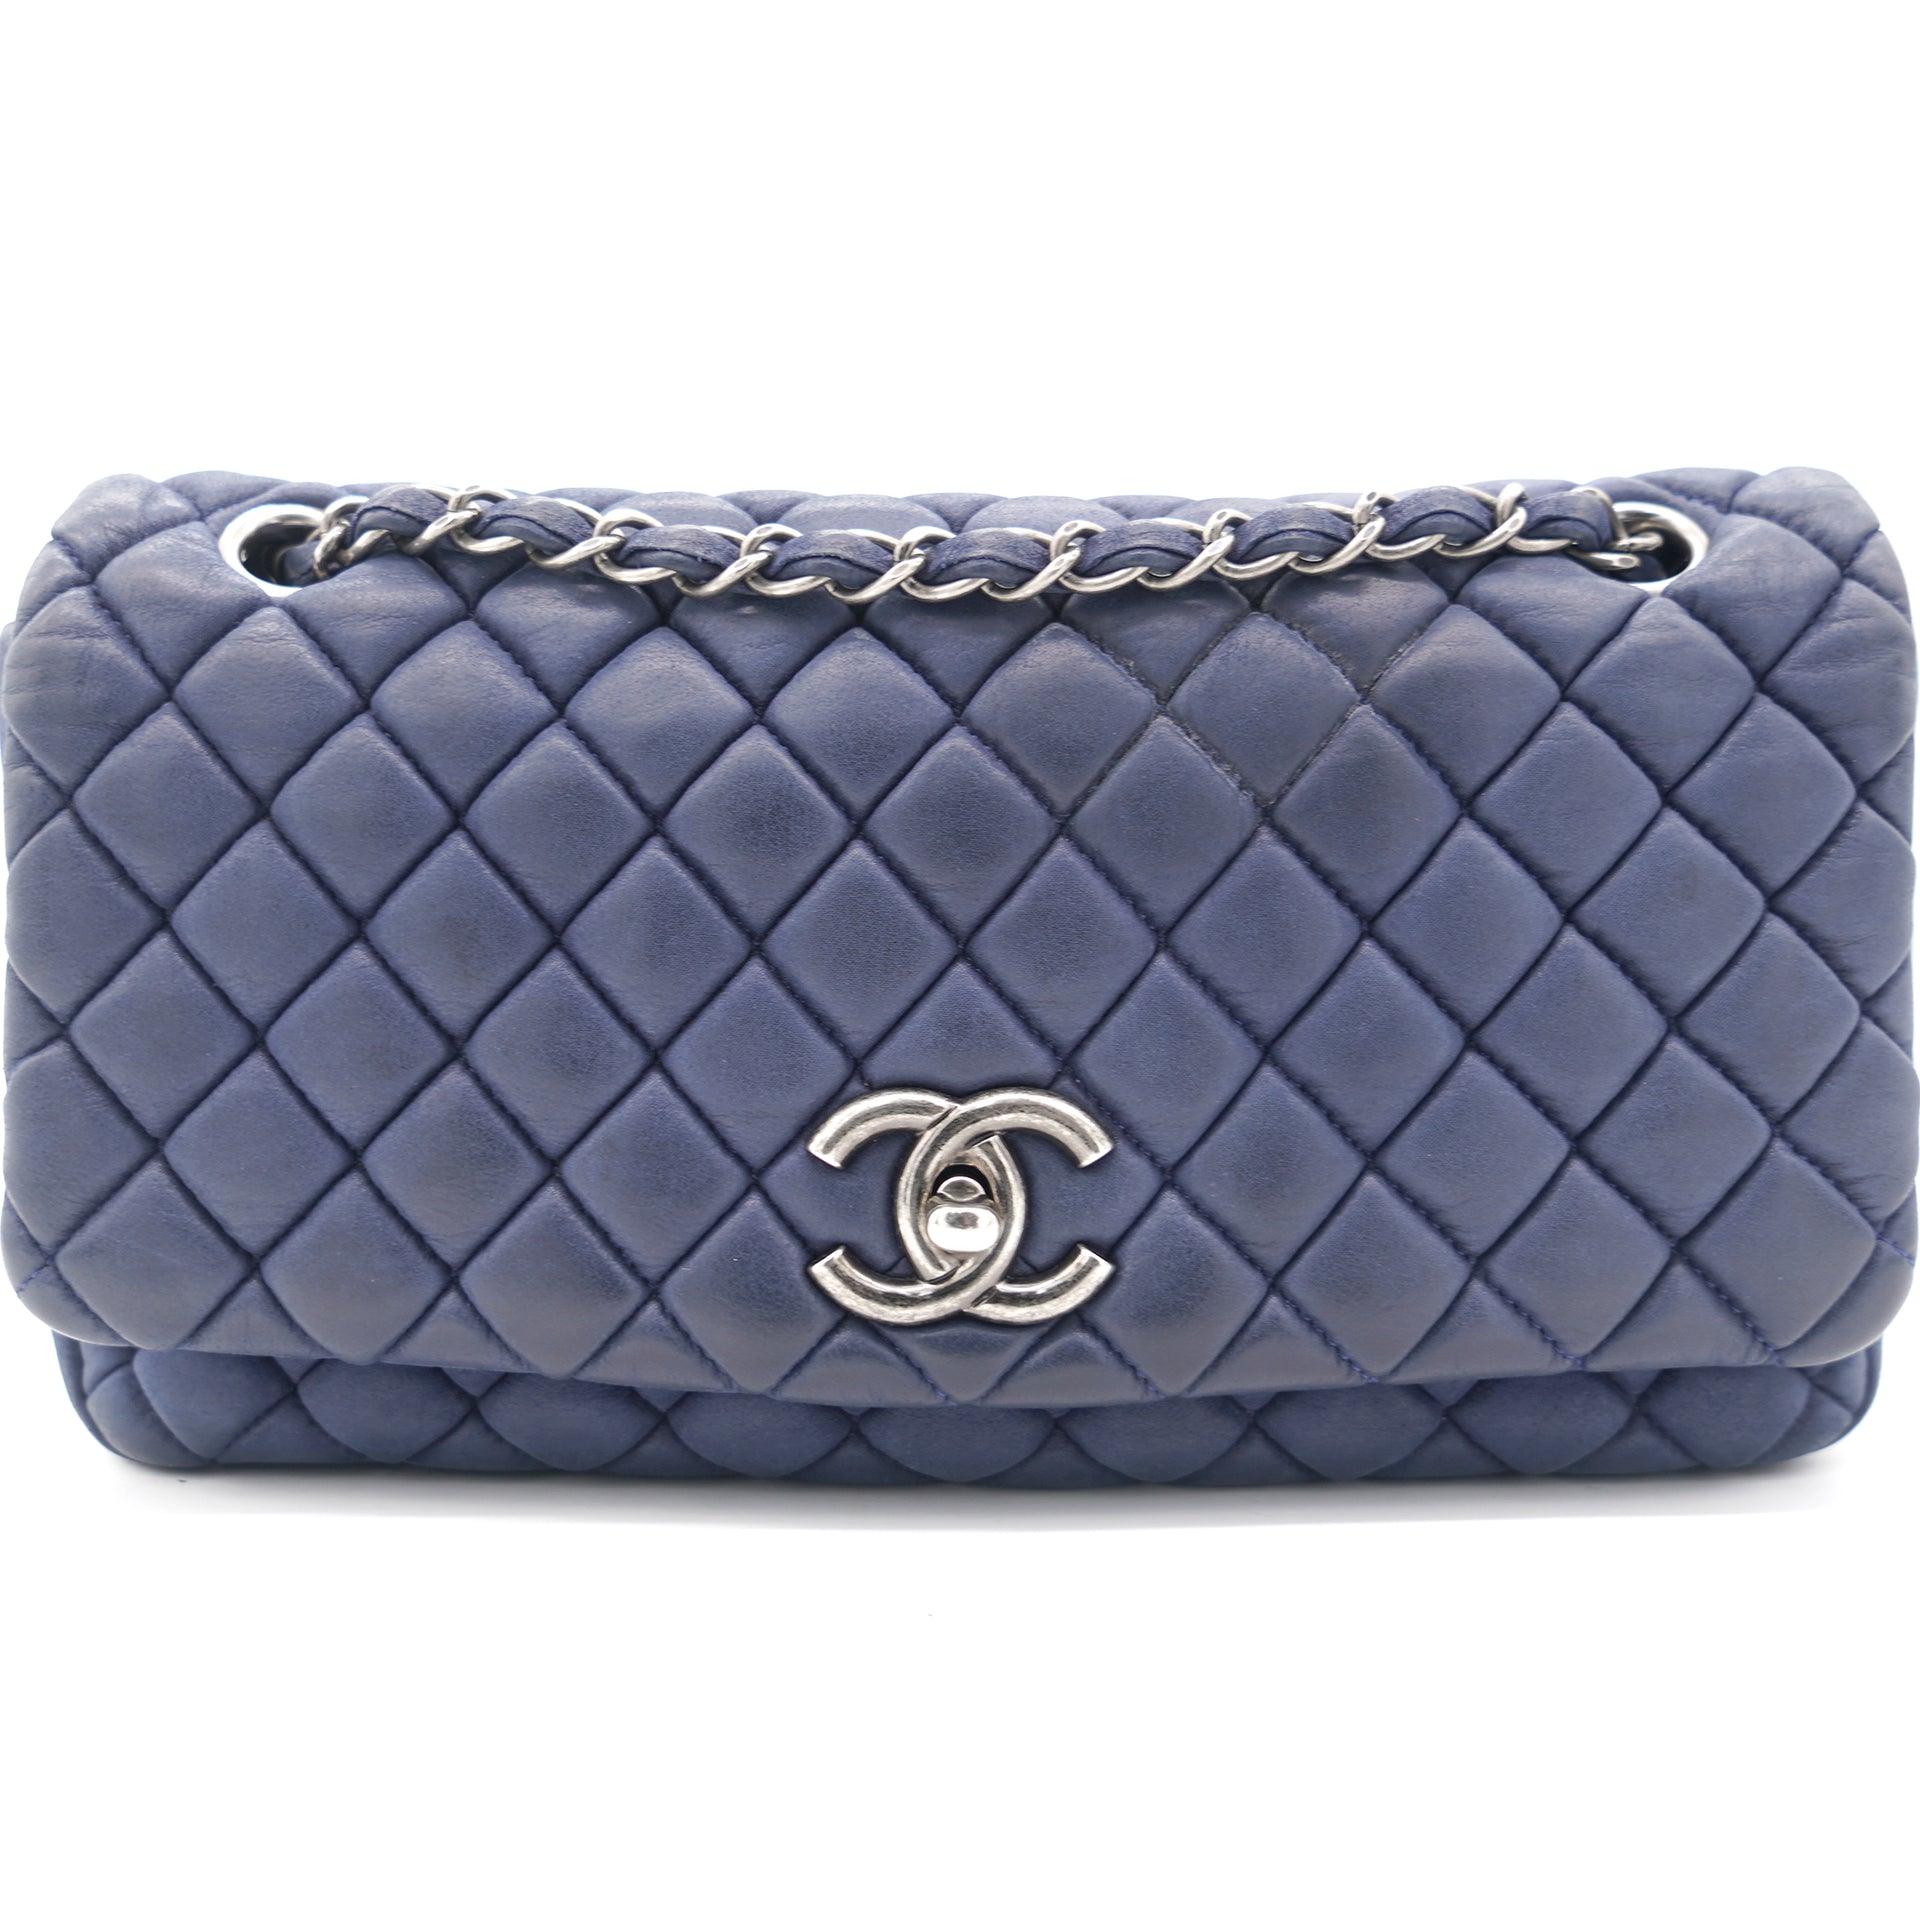 Navy Blue Quilted Leather CC Single Flap Bag